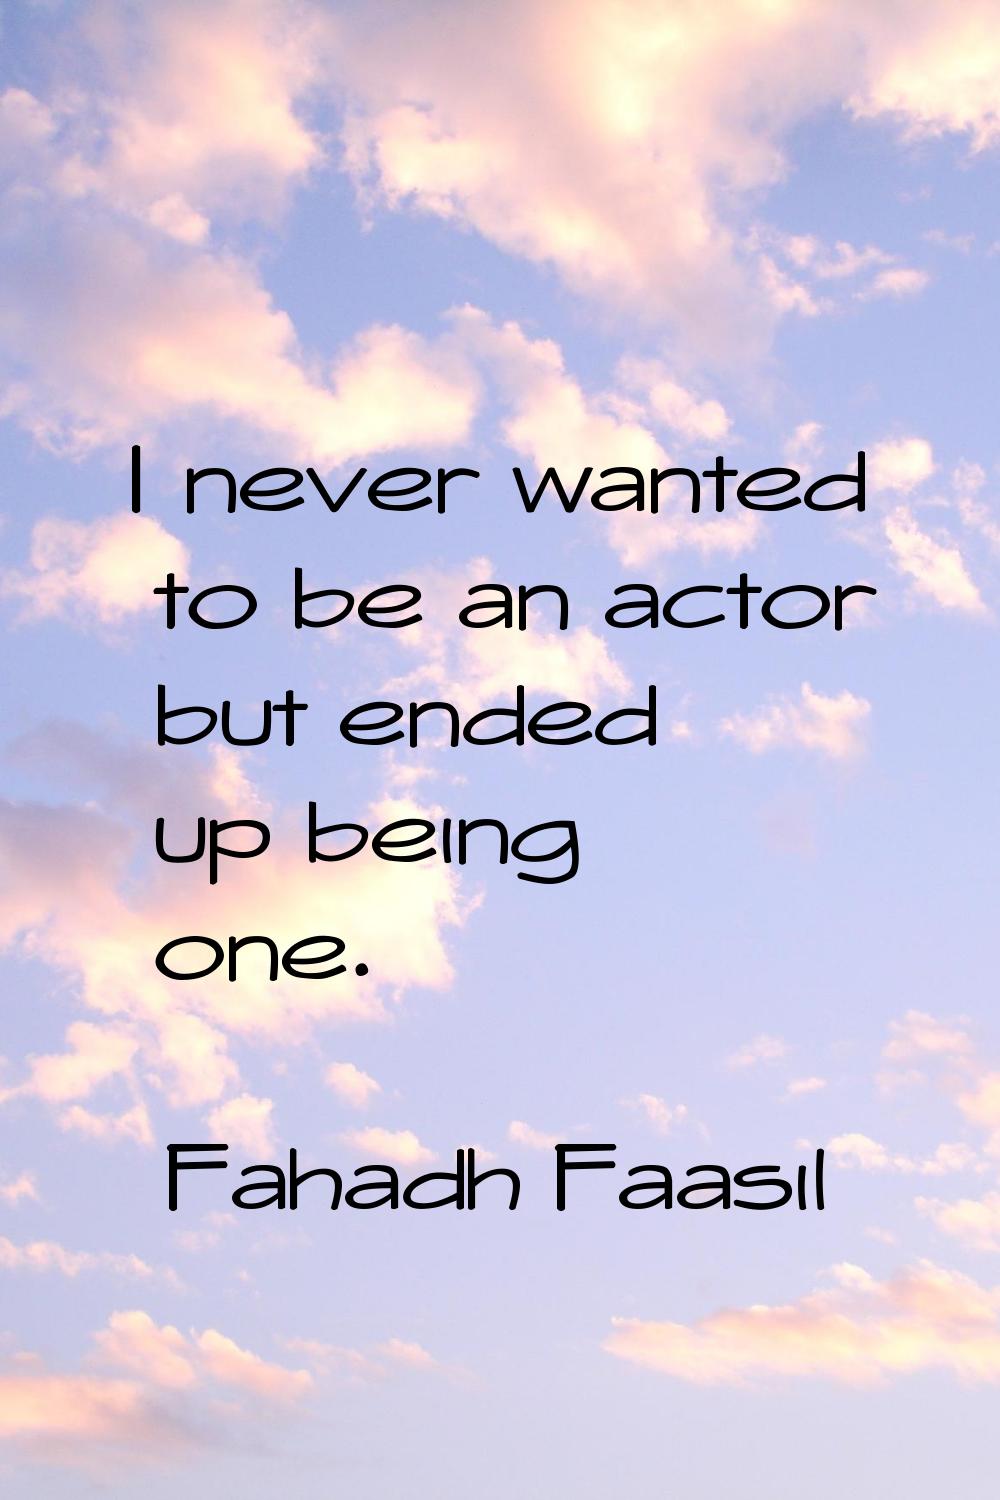 I never wanted to be an actor but ended up being one.